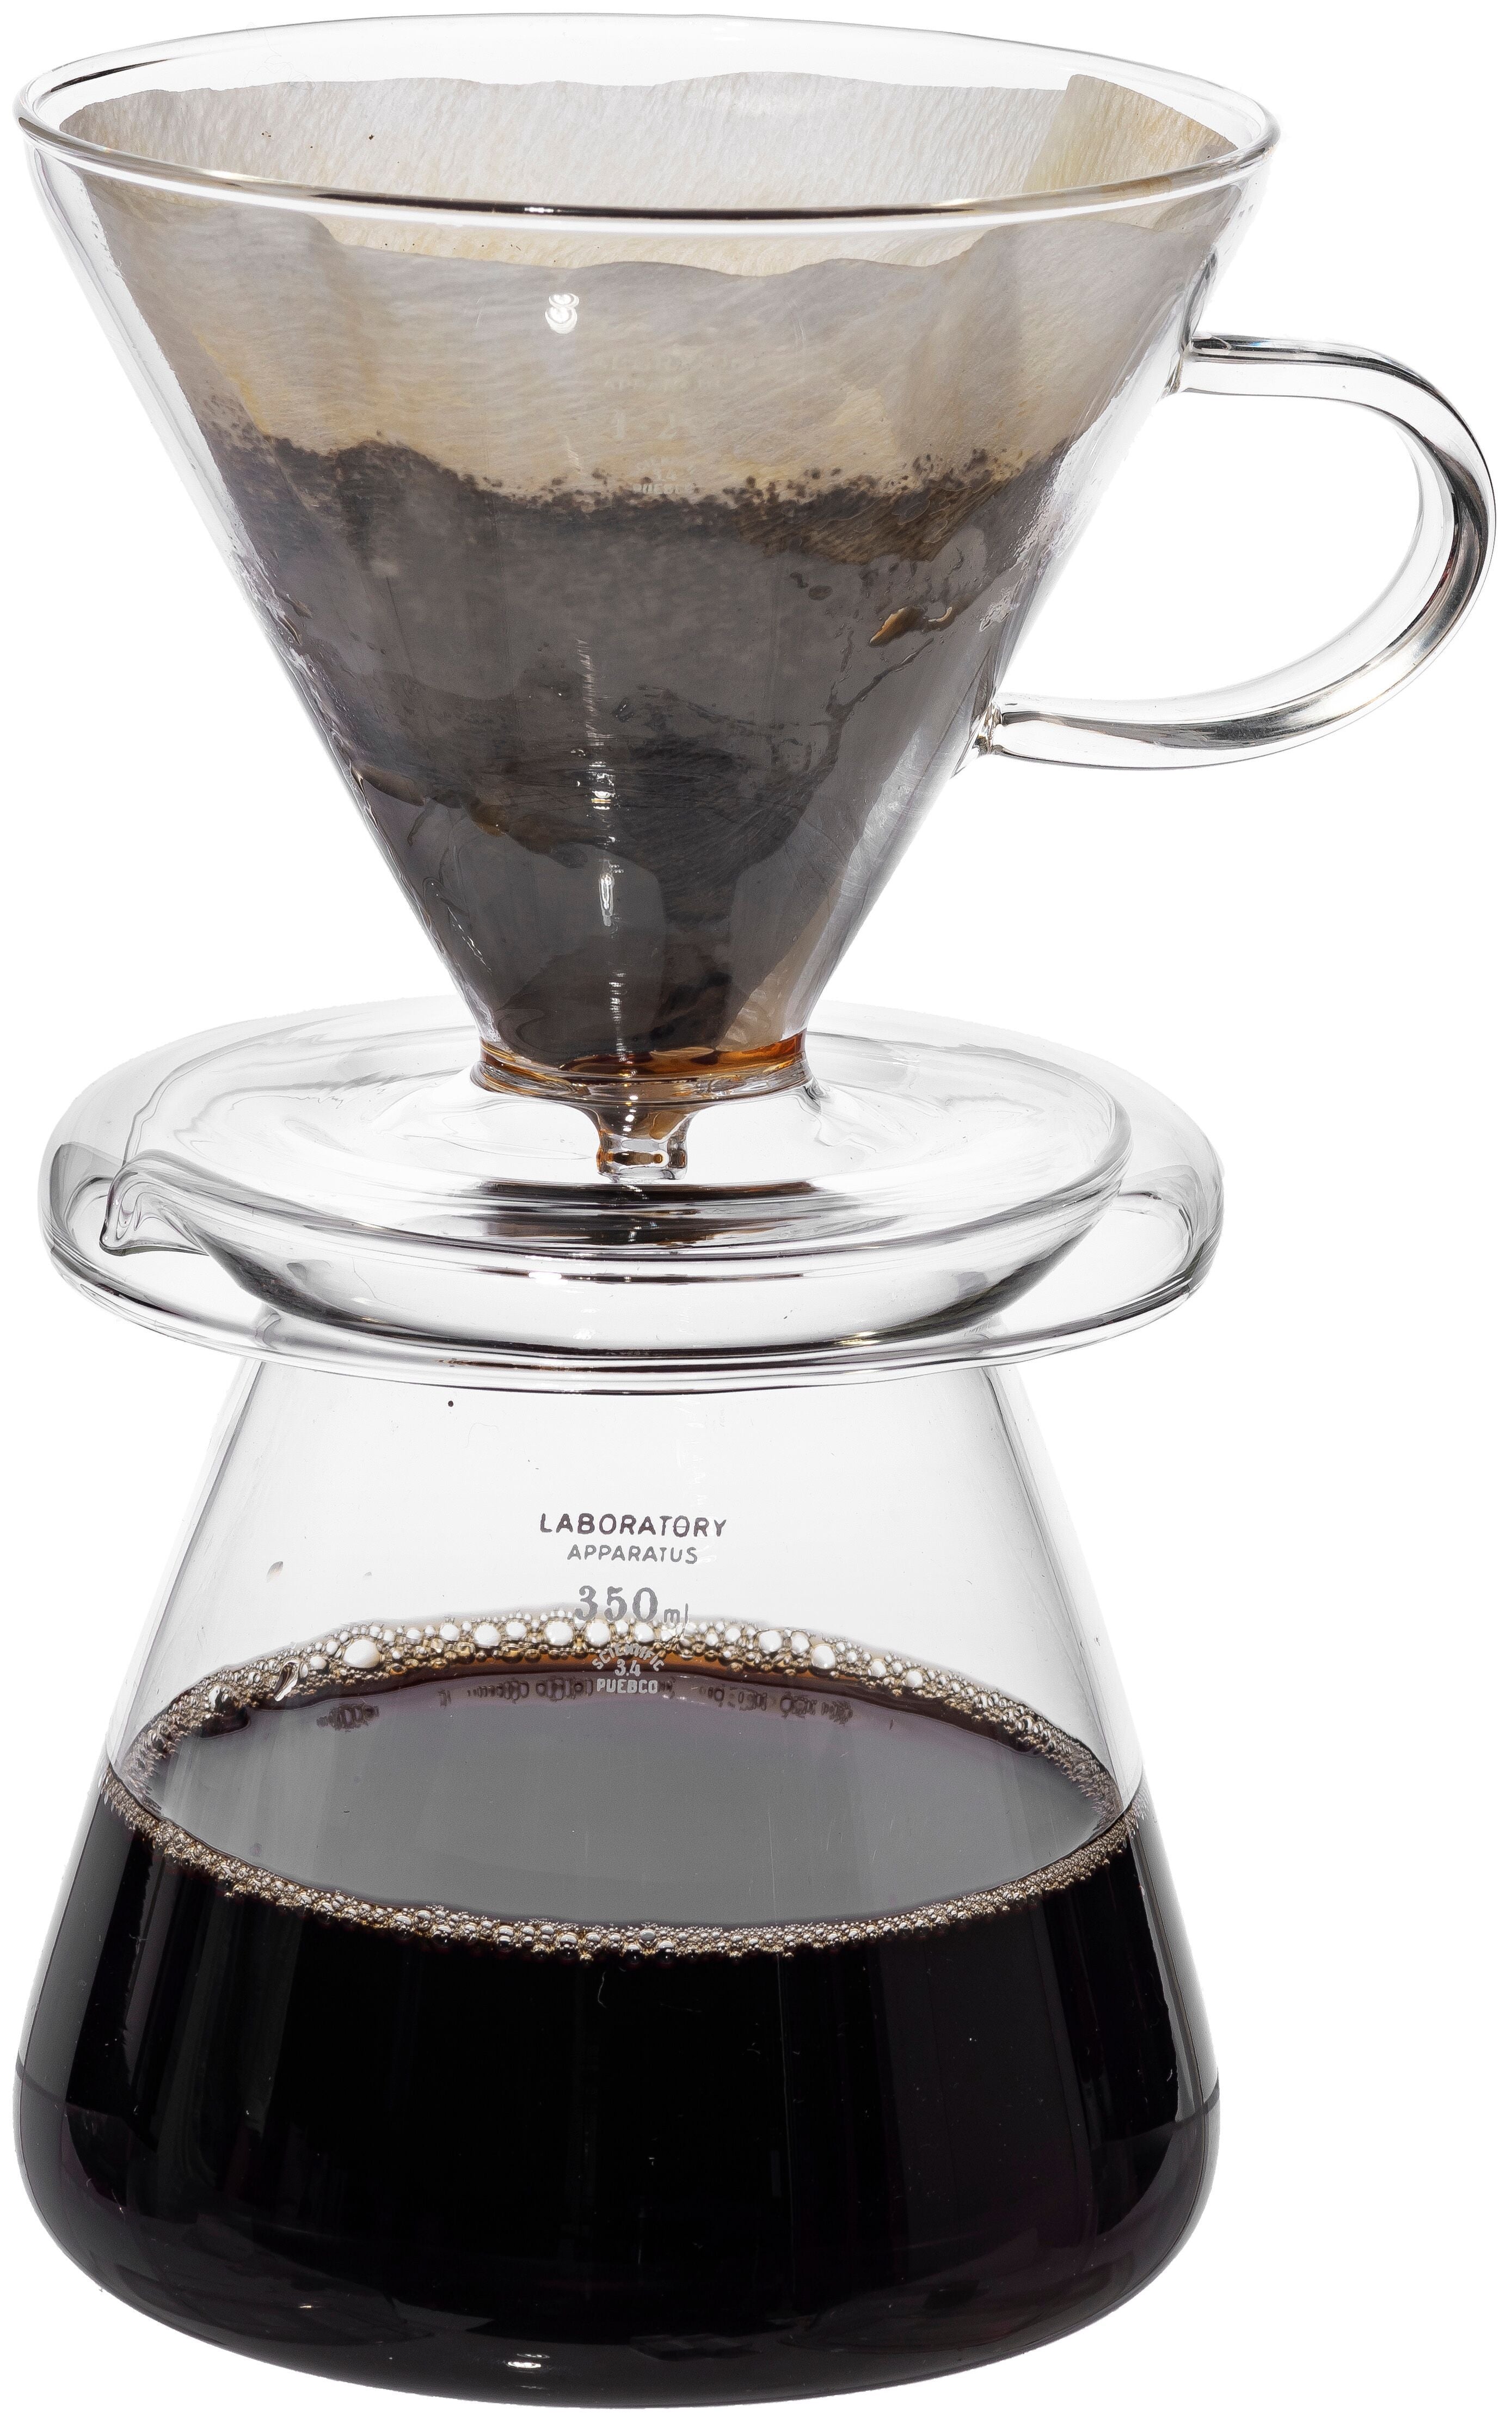 GLASS COFFEE DRIPPER SET – puebco